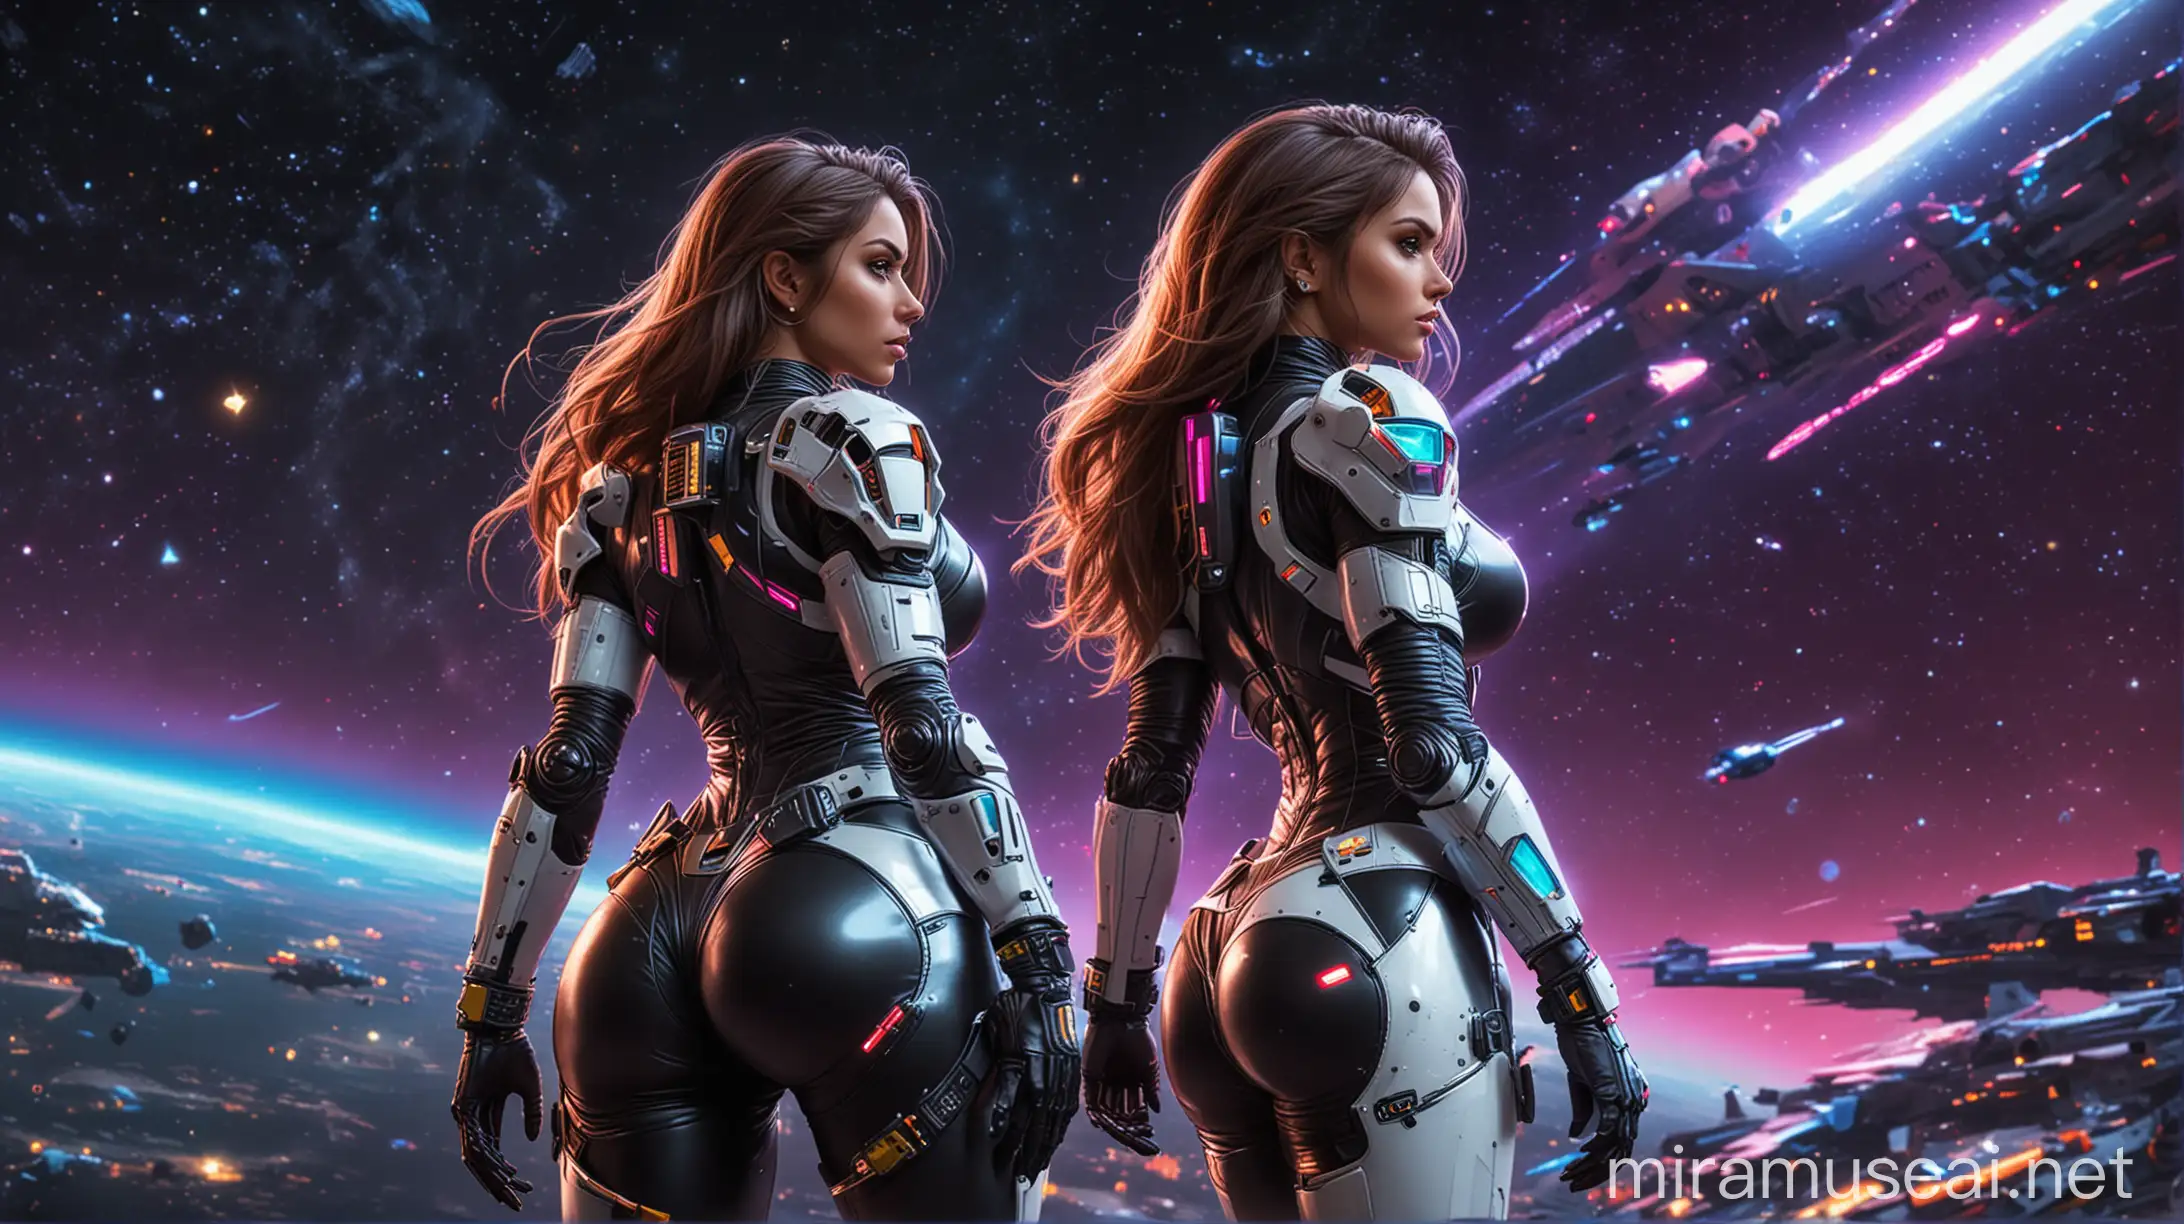 cartoon style, spanish slim finess model girl, huge massive boobs, heroic pose from behind, wild long modern hair style, tight heavily armored spacesuit, black and white spacesuit, colorful neon glowing spacesuit, belt with pouches, colorful night sky, giant sci-fi spaceship battlecruiser